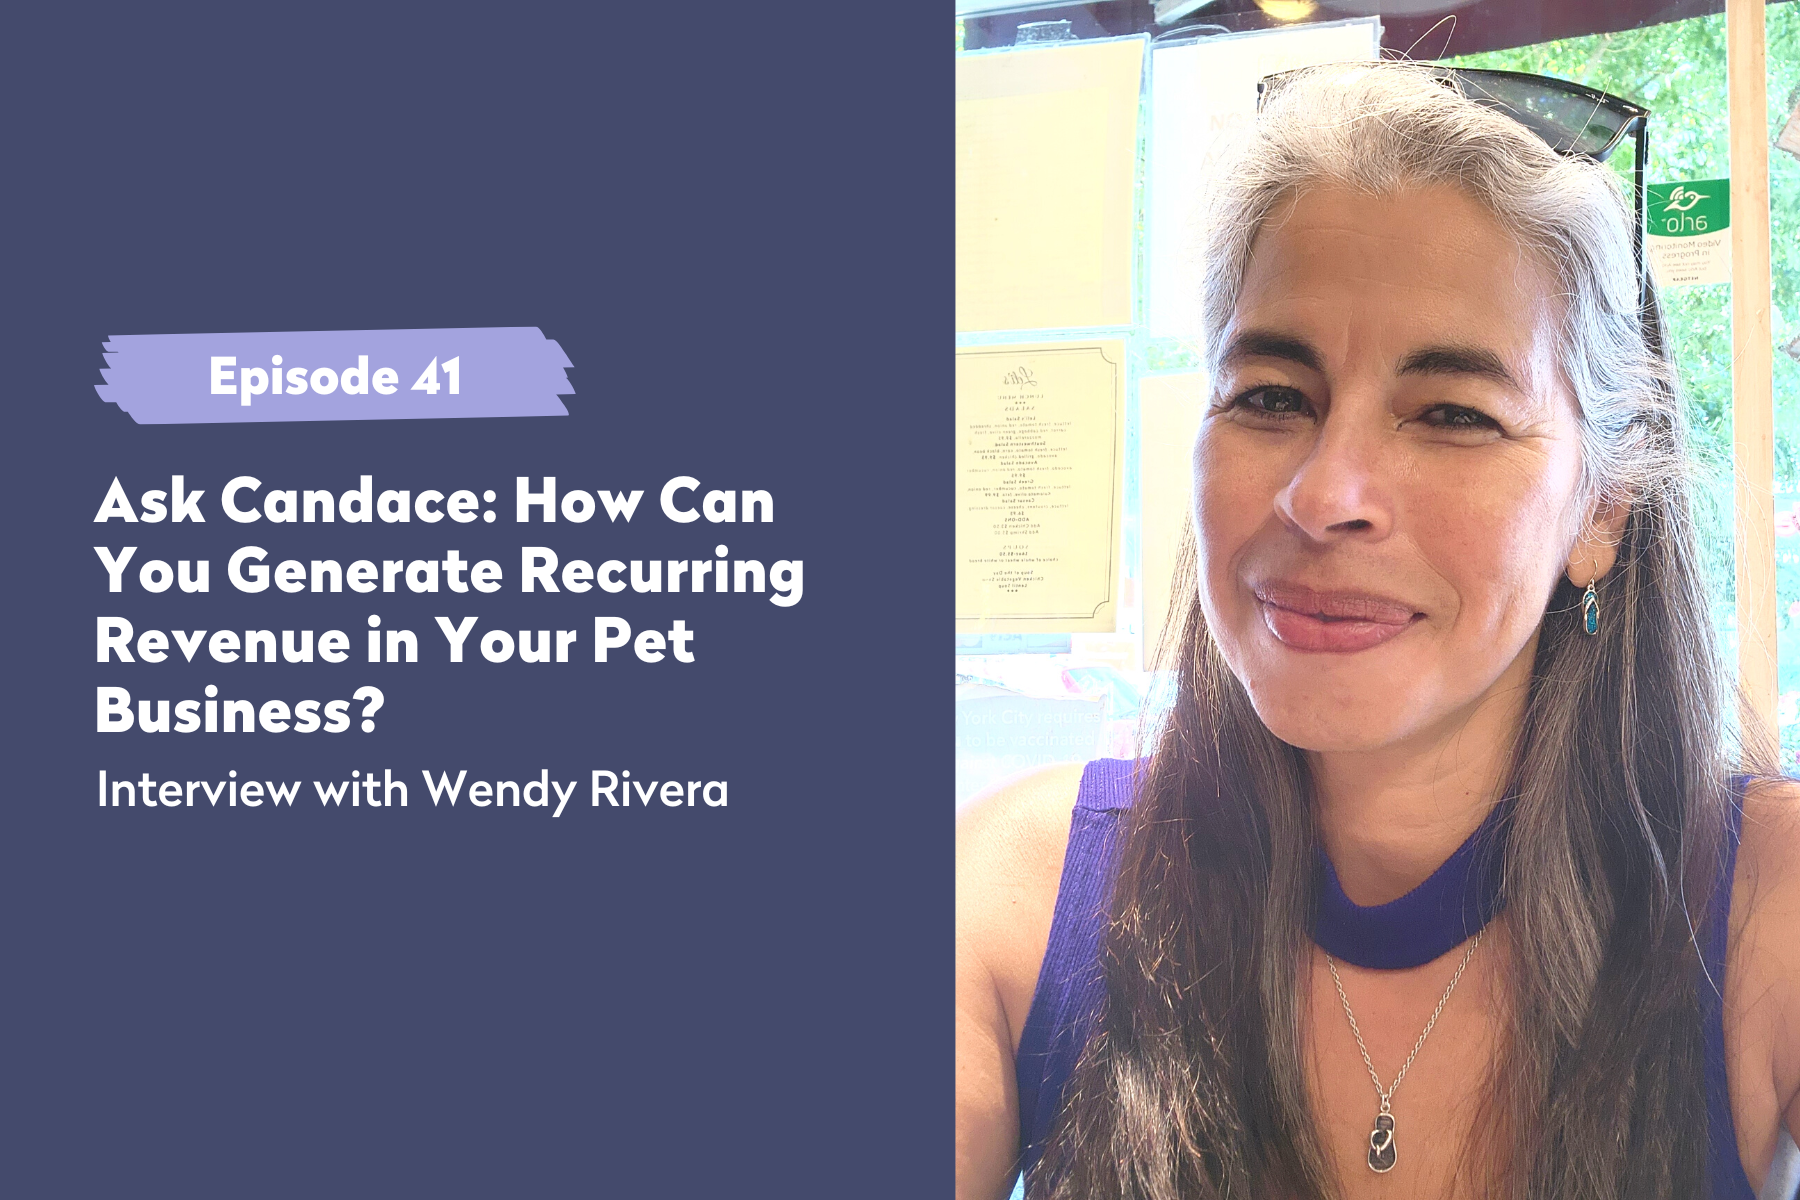 Episode 41 | Ask Candace: How Can You Generate Recurring Revenue in Your Pet Business?